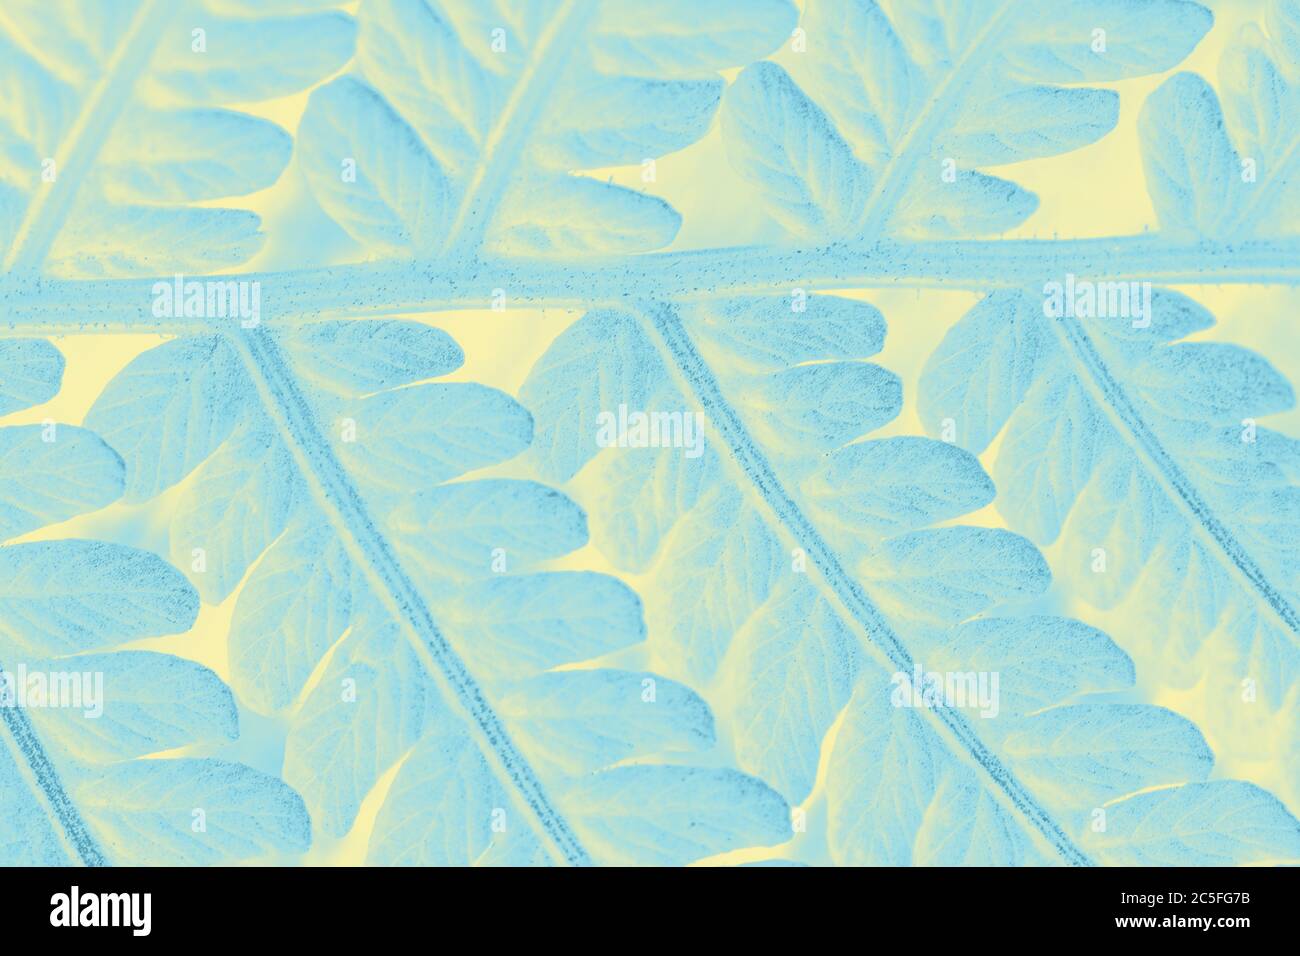 Cold winter background for wildlife advertising Eco concept. Frosty patterns on the glass are tinted in warm bed colors. Fern close-up in pop art proc Stock Photo